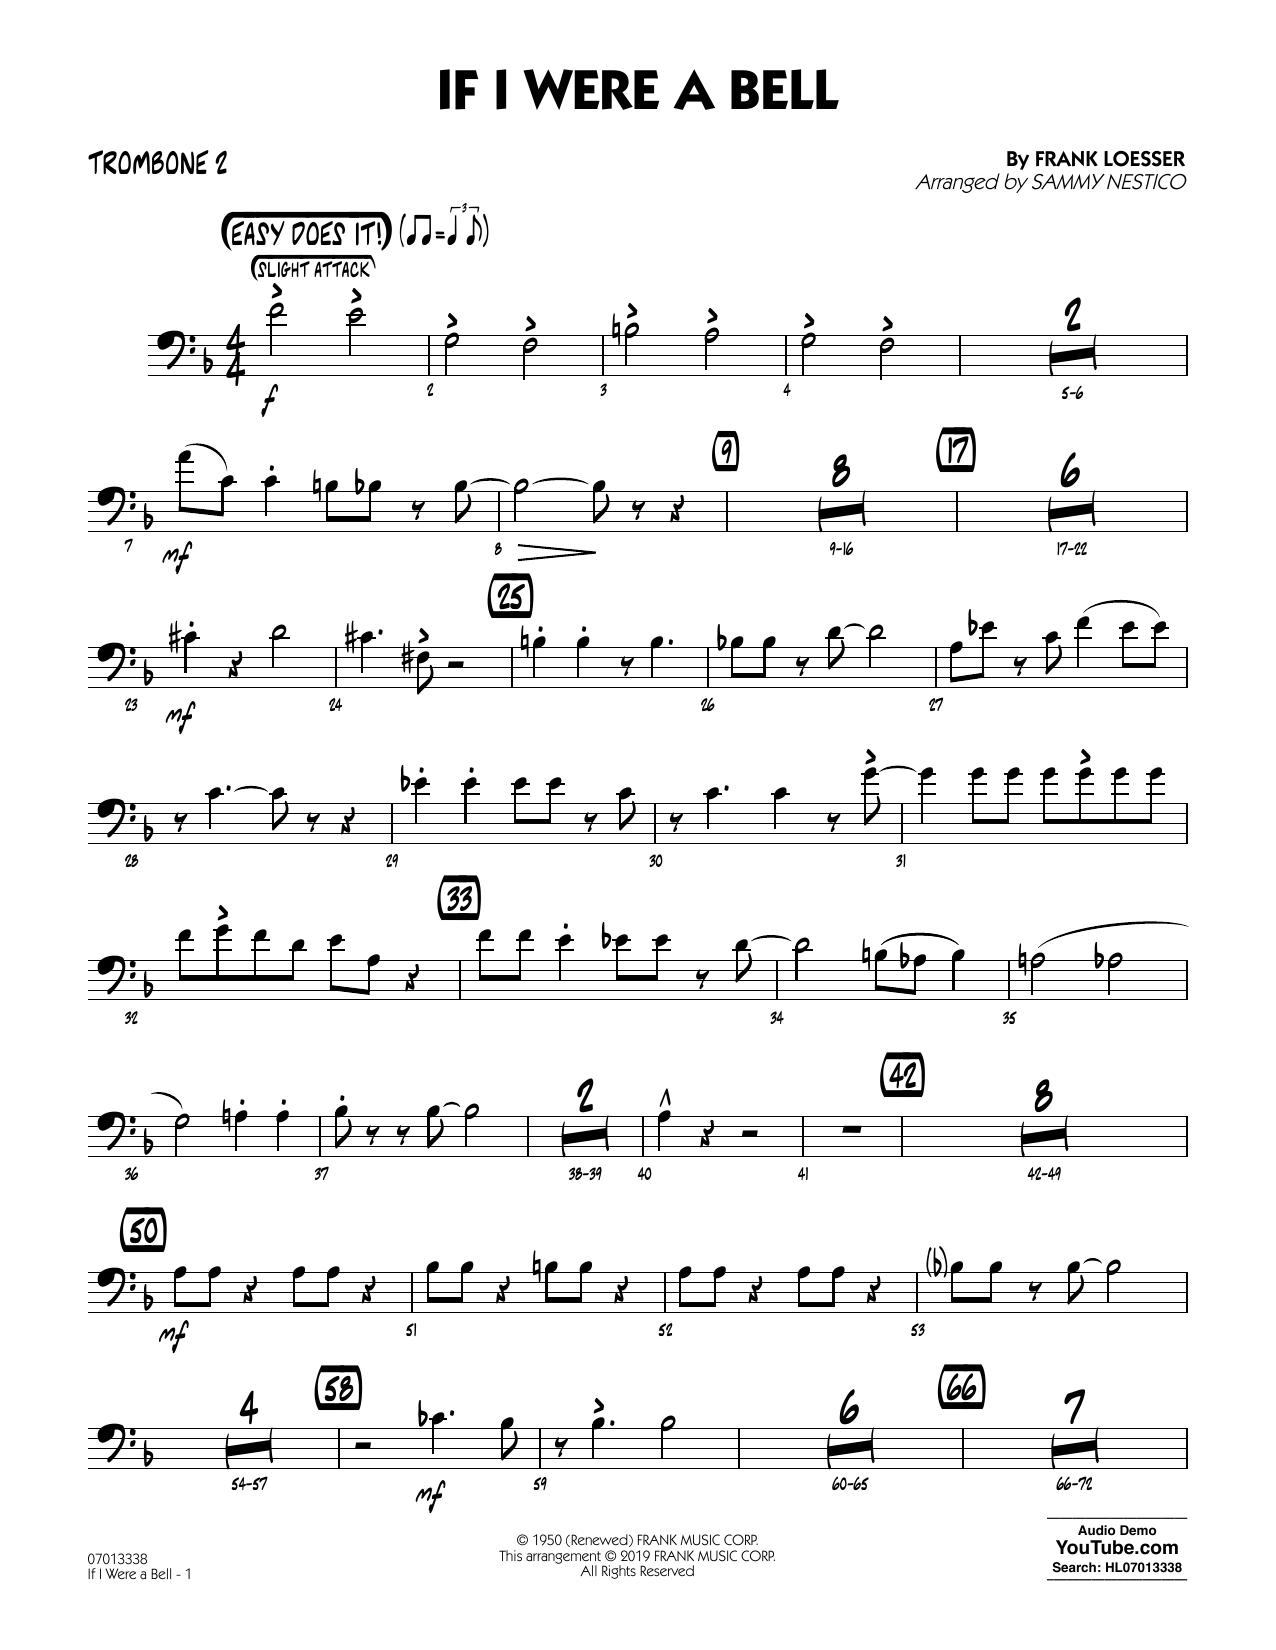 Frank Loesser If I Were a Bell (arr. Sammy Nestico) - Trombone 2 sheet music preview music notes and score for Jazz Ensemble including 2 page(s)